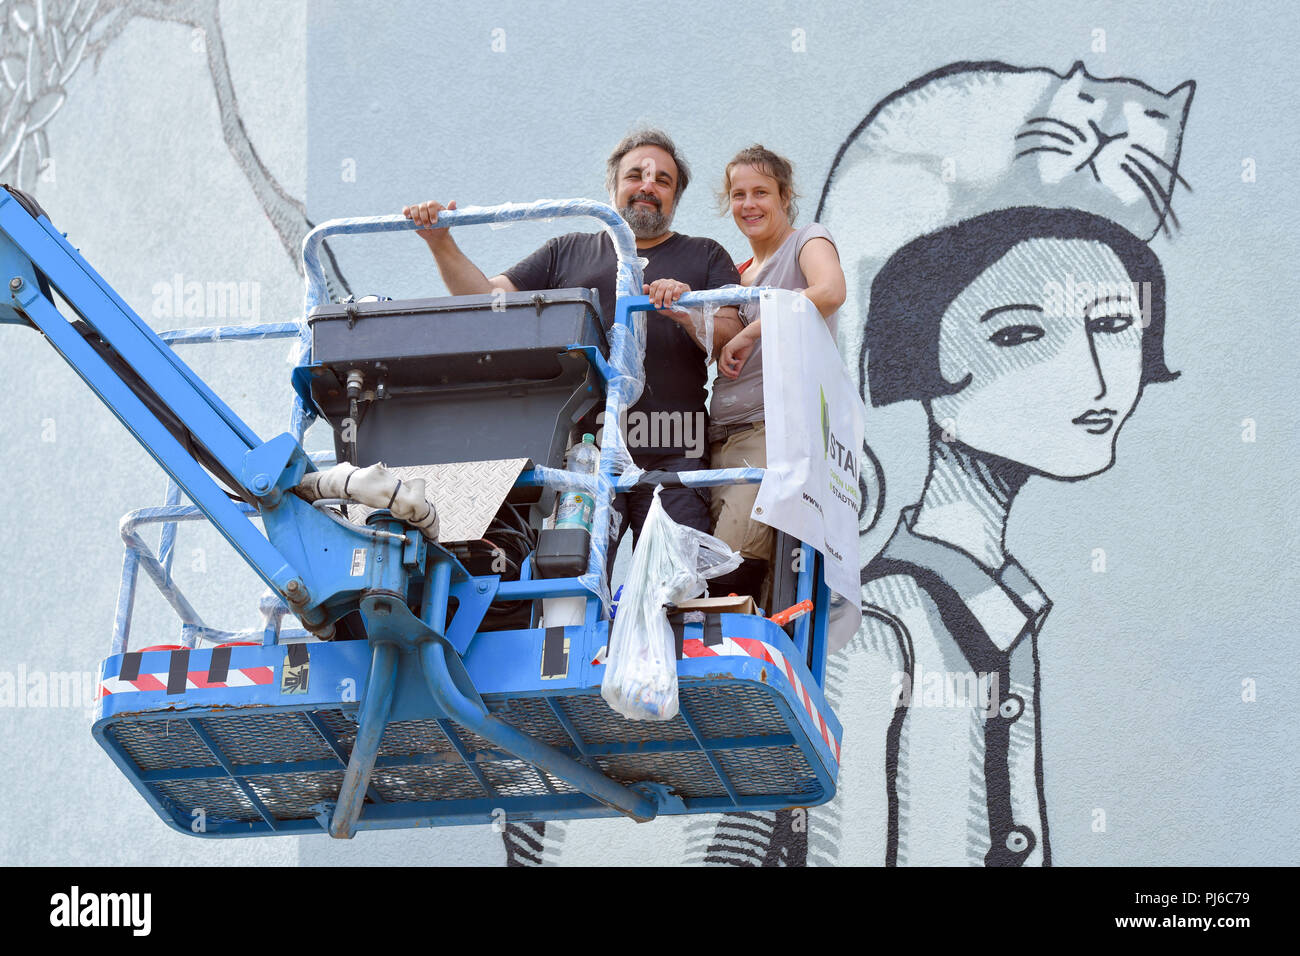 Mannheim, Germany. 23rd Aug, 2018. 23.08.2018, Baden-Württemberg, Mannheim: Christina Laube (r) and Mehrdad Zaeri from the artist duo 'Sourati' stand on a lifting platform in front of a mural sprayed onto a house wall entitled 'Abschied und Neubeginn' (lit. Farewell and New Beginning). At the end of the year, 18 huge works of art will be displayed on the facades of the North Baden city. Credit: Uwe Anspach/dpa/Alamy Live News Stock Photo